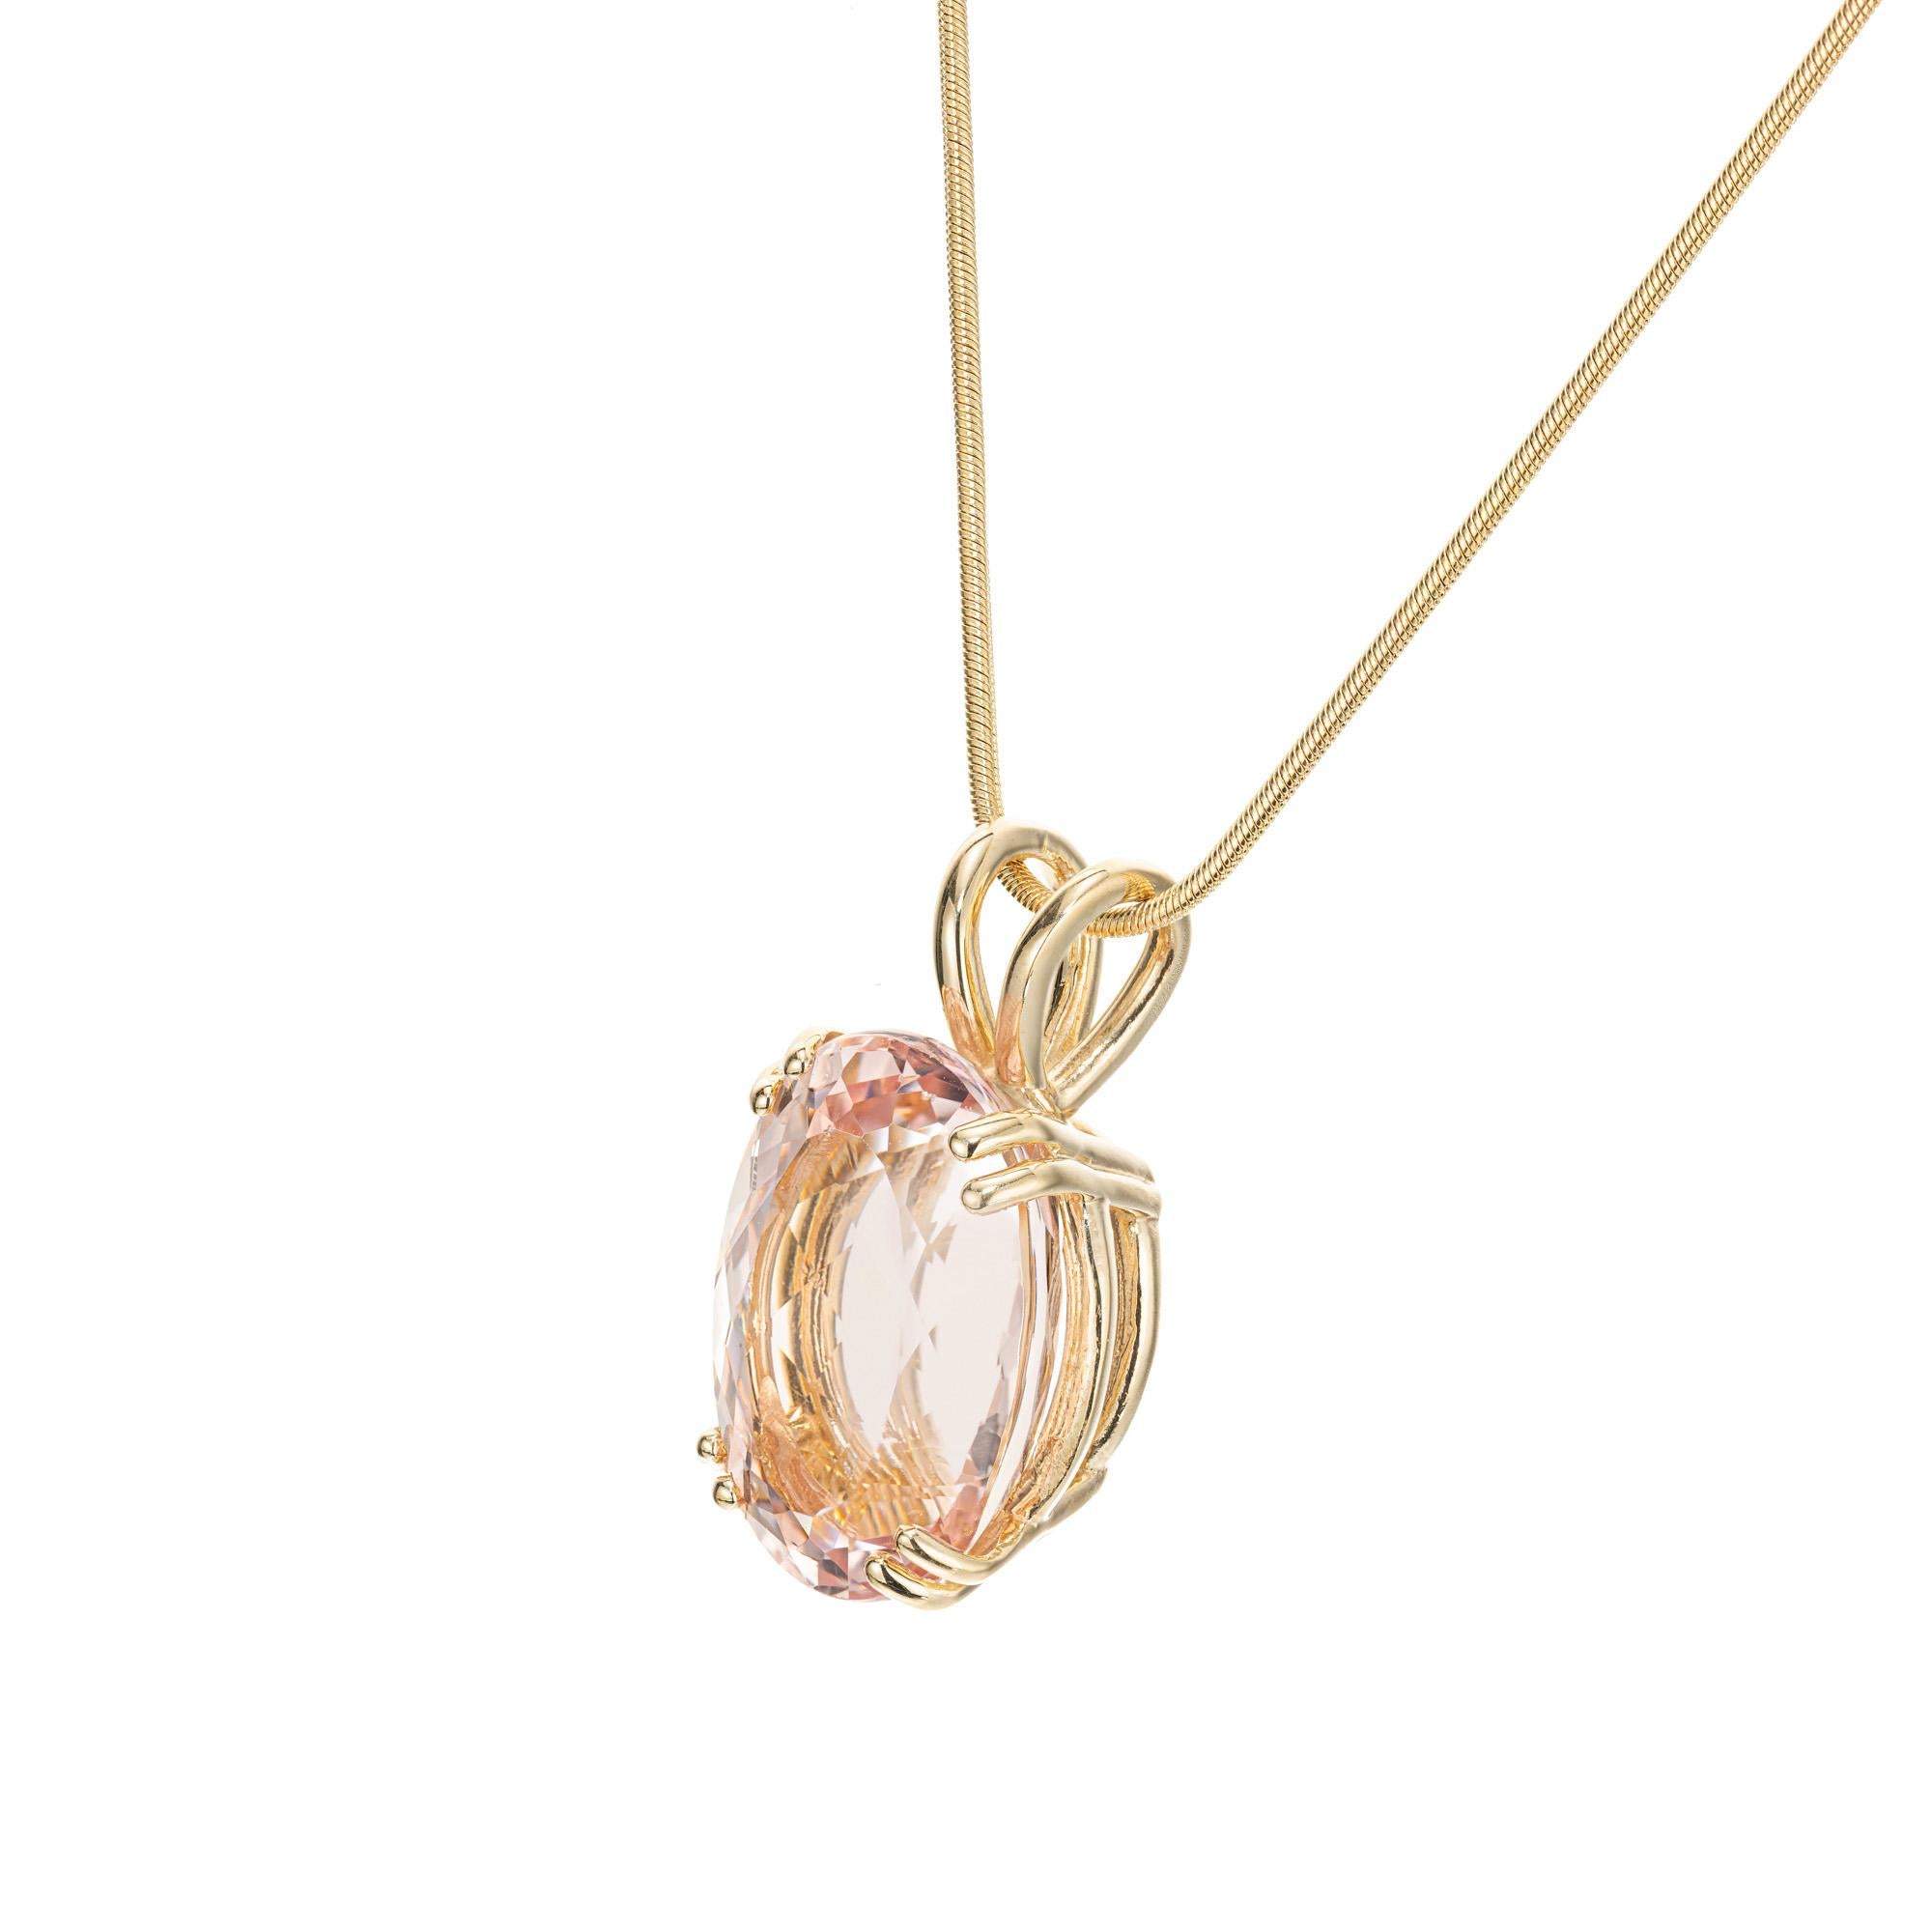 Morganite and diamond pendant necklace. Oval 12.95ct oval soft pink morganite in a 14k yellow gold double prong setting. 16 inch yellow gold chain.  

1 oval pink morganite, VS approx. 12.95cts
14k yellow gold 
Stamped: 585
9.6 grams
Top to bottom: